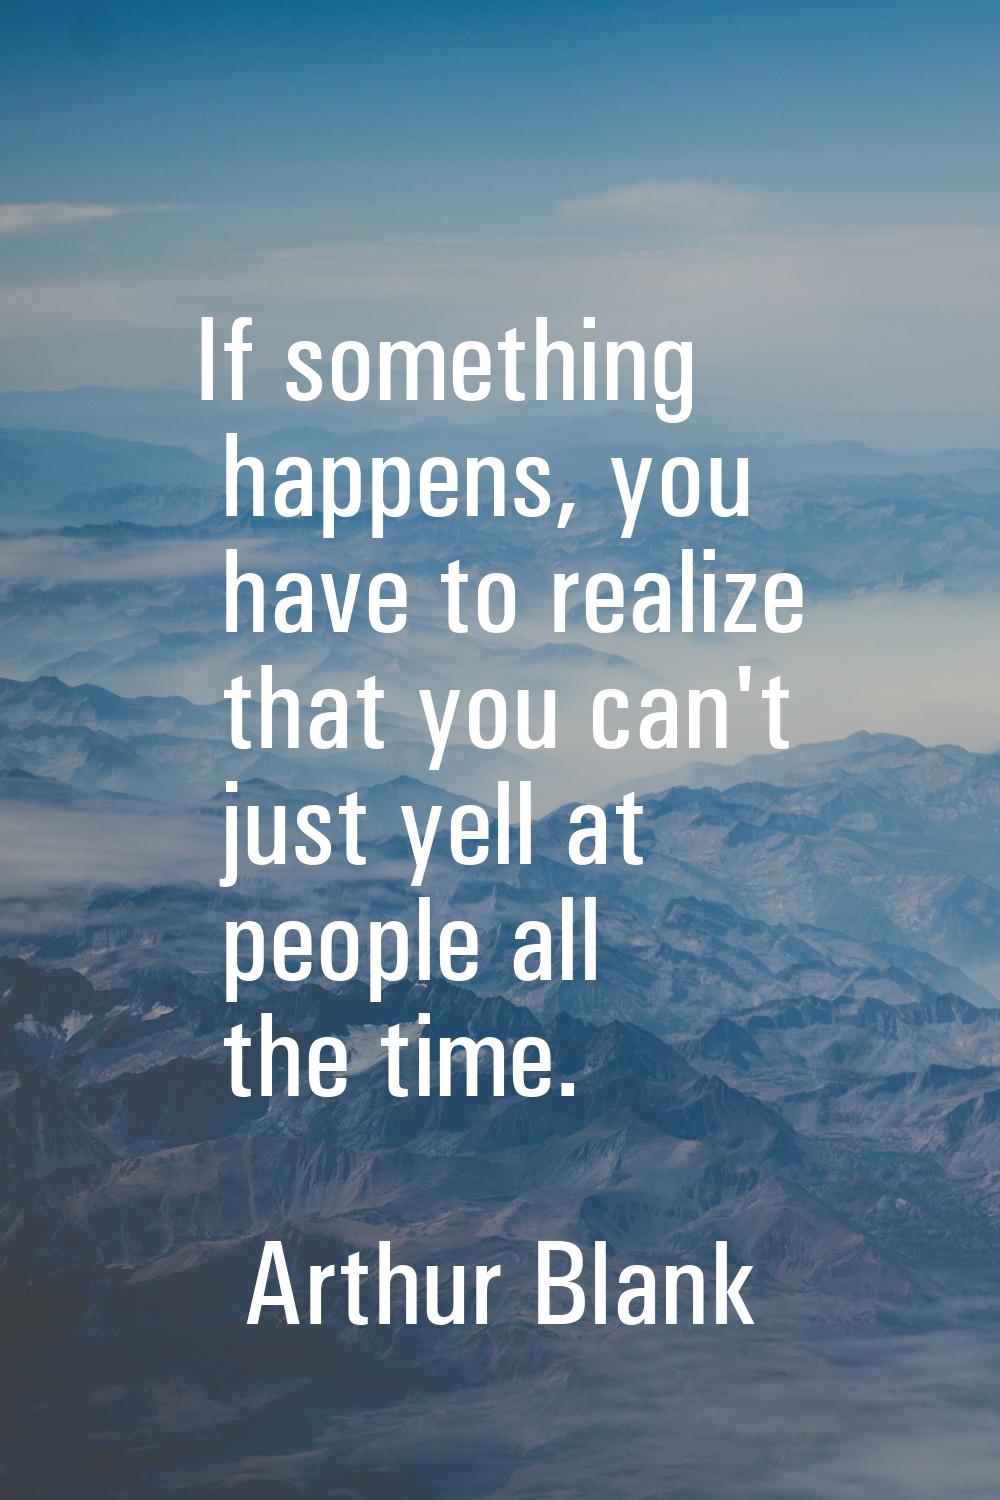 If something happens, you have to realize that you can't just yell at people all the time.